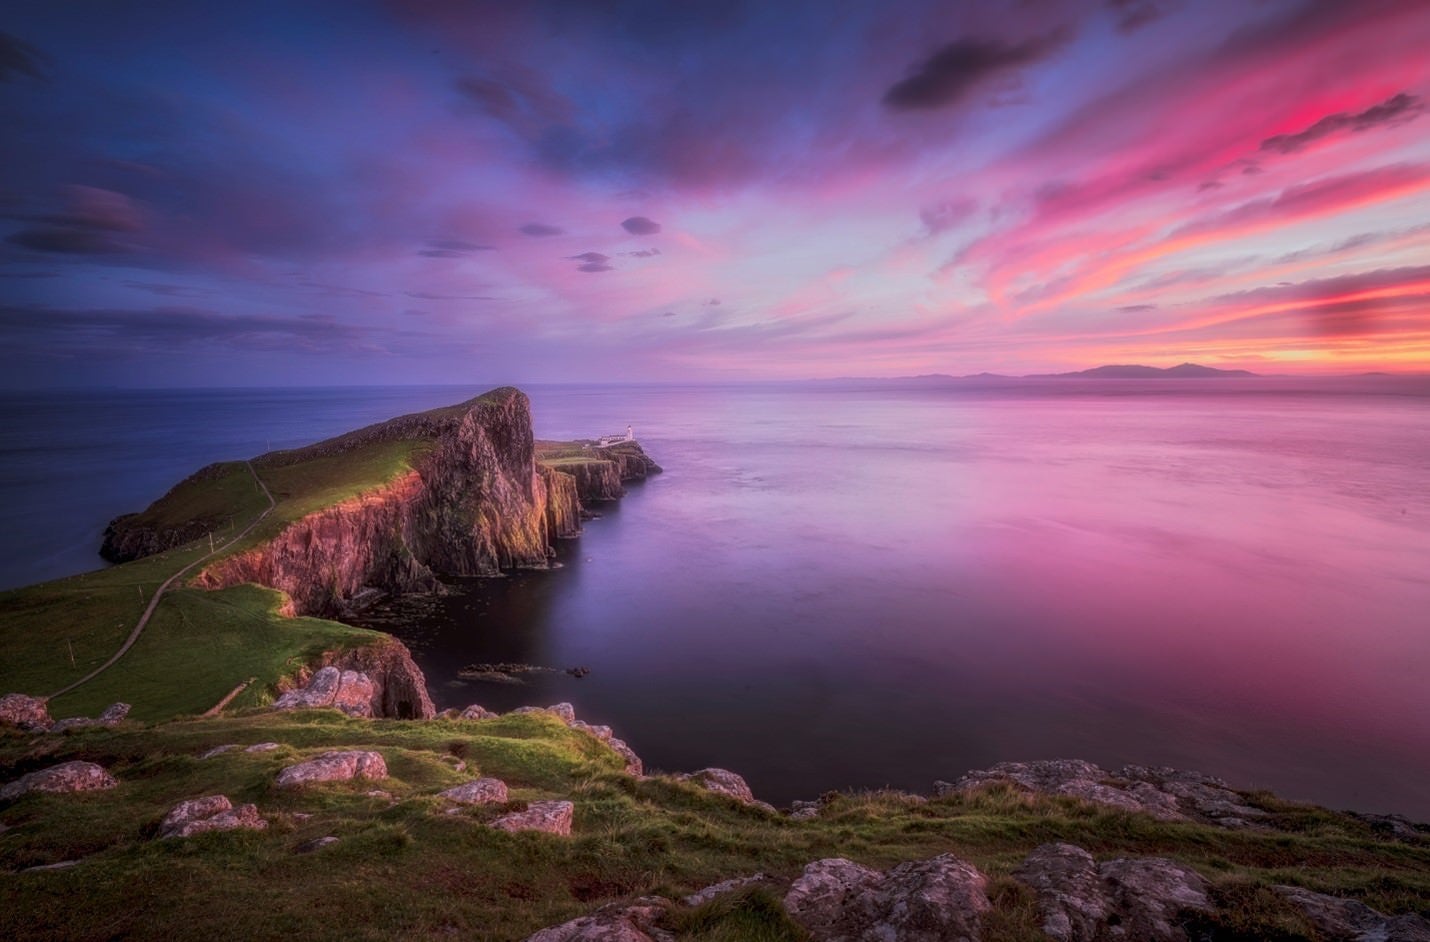 “An unforgettable sunset over Niest Point, Scotland, painting the sky with hues of wonder” Photo by Raj Bose. Sony Alpha 1. Sony 16-35mm f/2.8 G Master. 13-sec., f/22, ISO 100